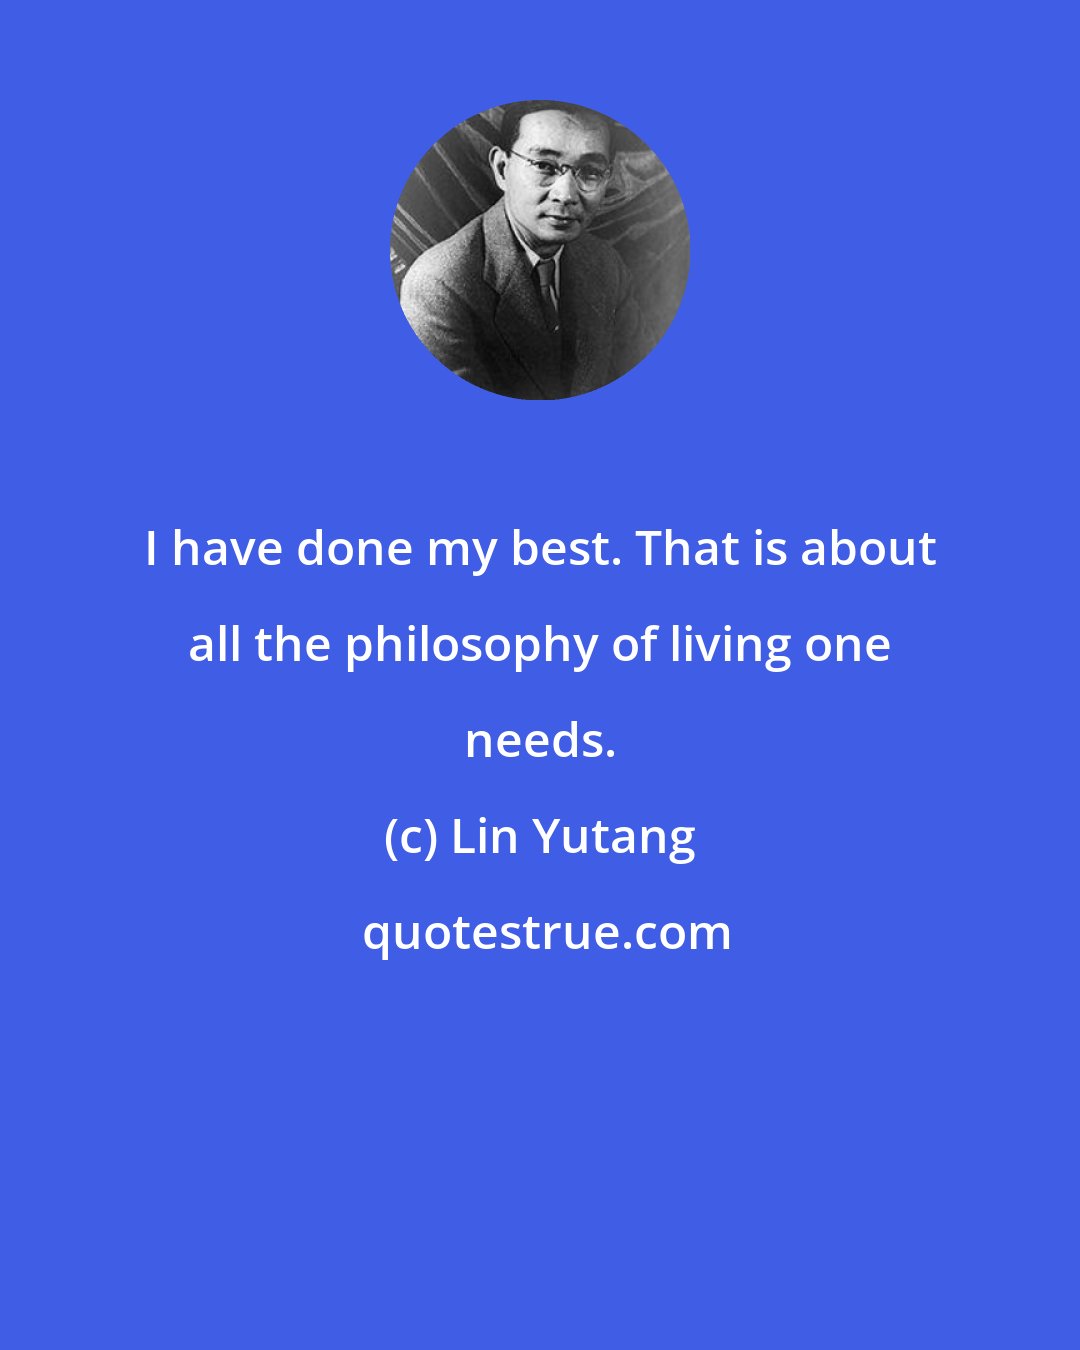 Lin Yutang: I have done my best. That is about all the philosophy of living one needs.